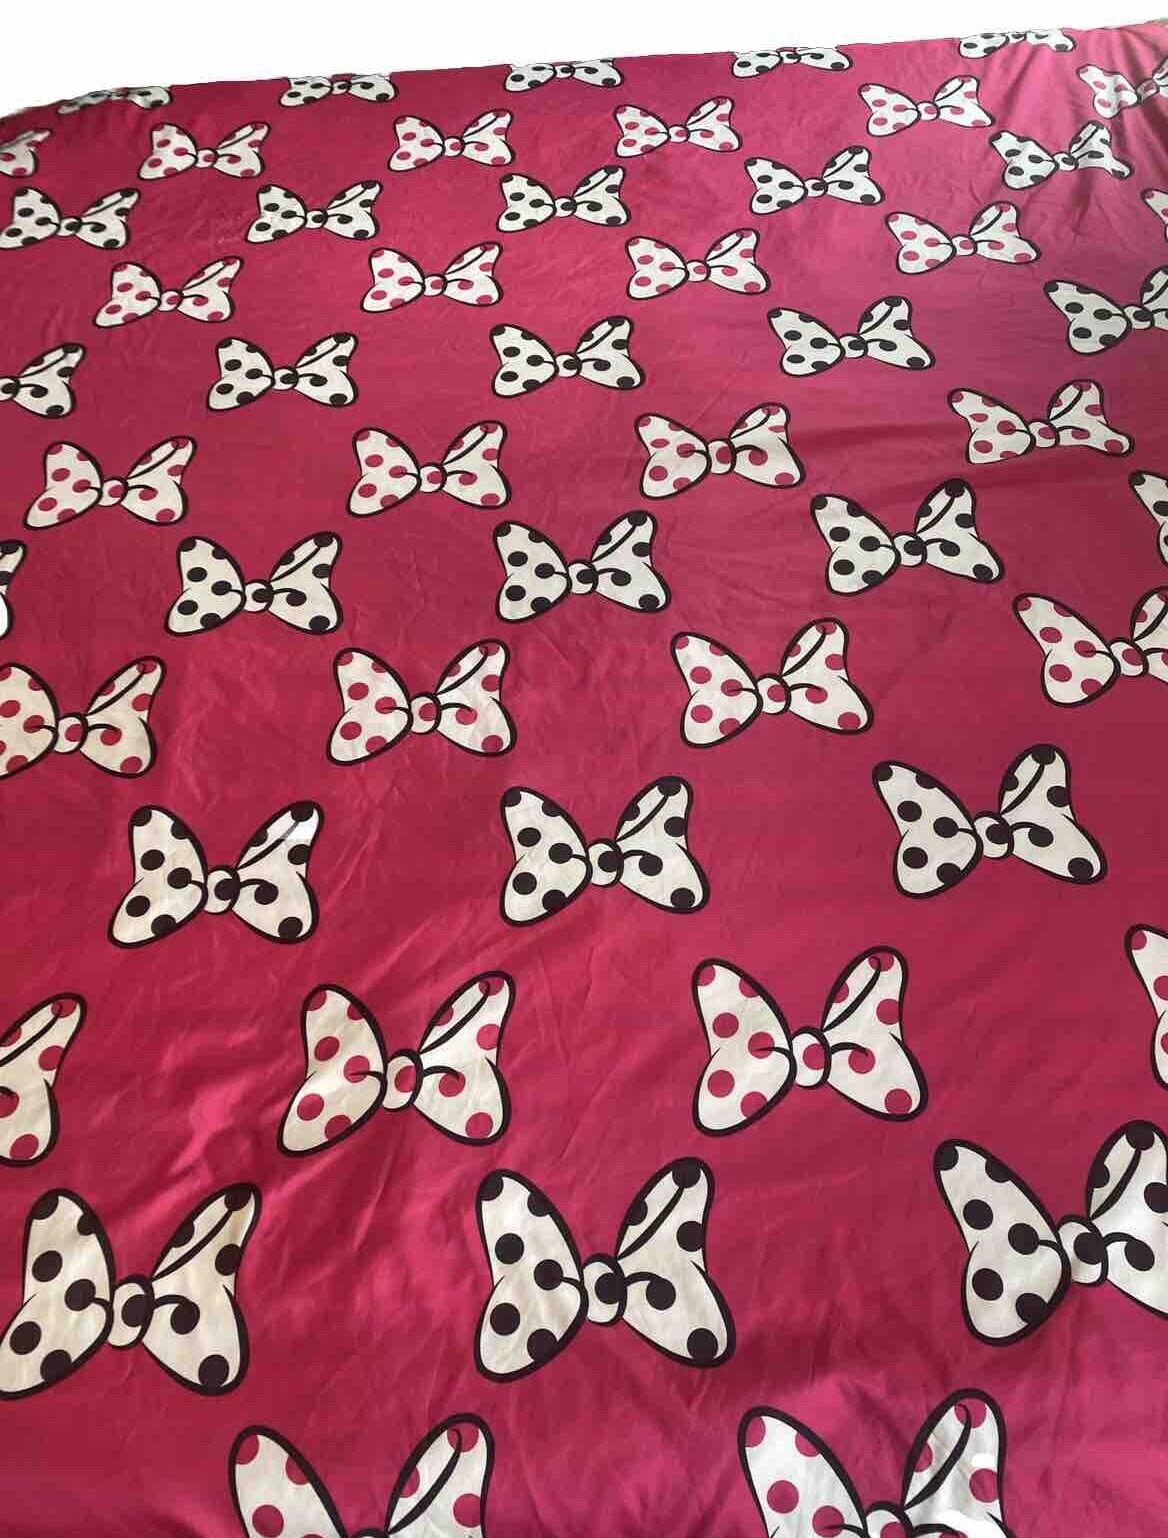 Disney Minnie Mouse Hot Pink Twin Flat Sheet Large Bows W/ Polka Dots Polyester